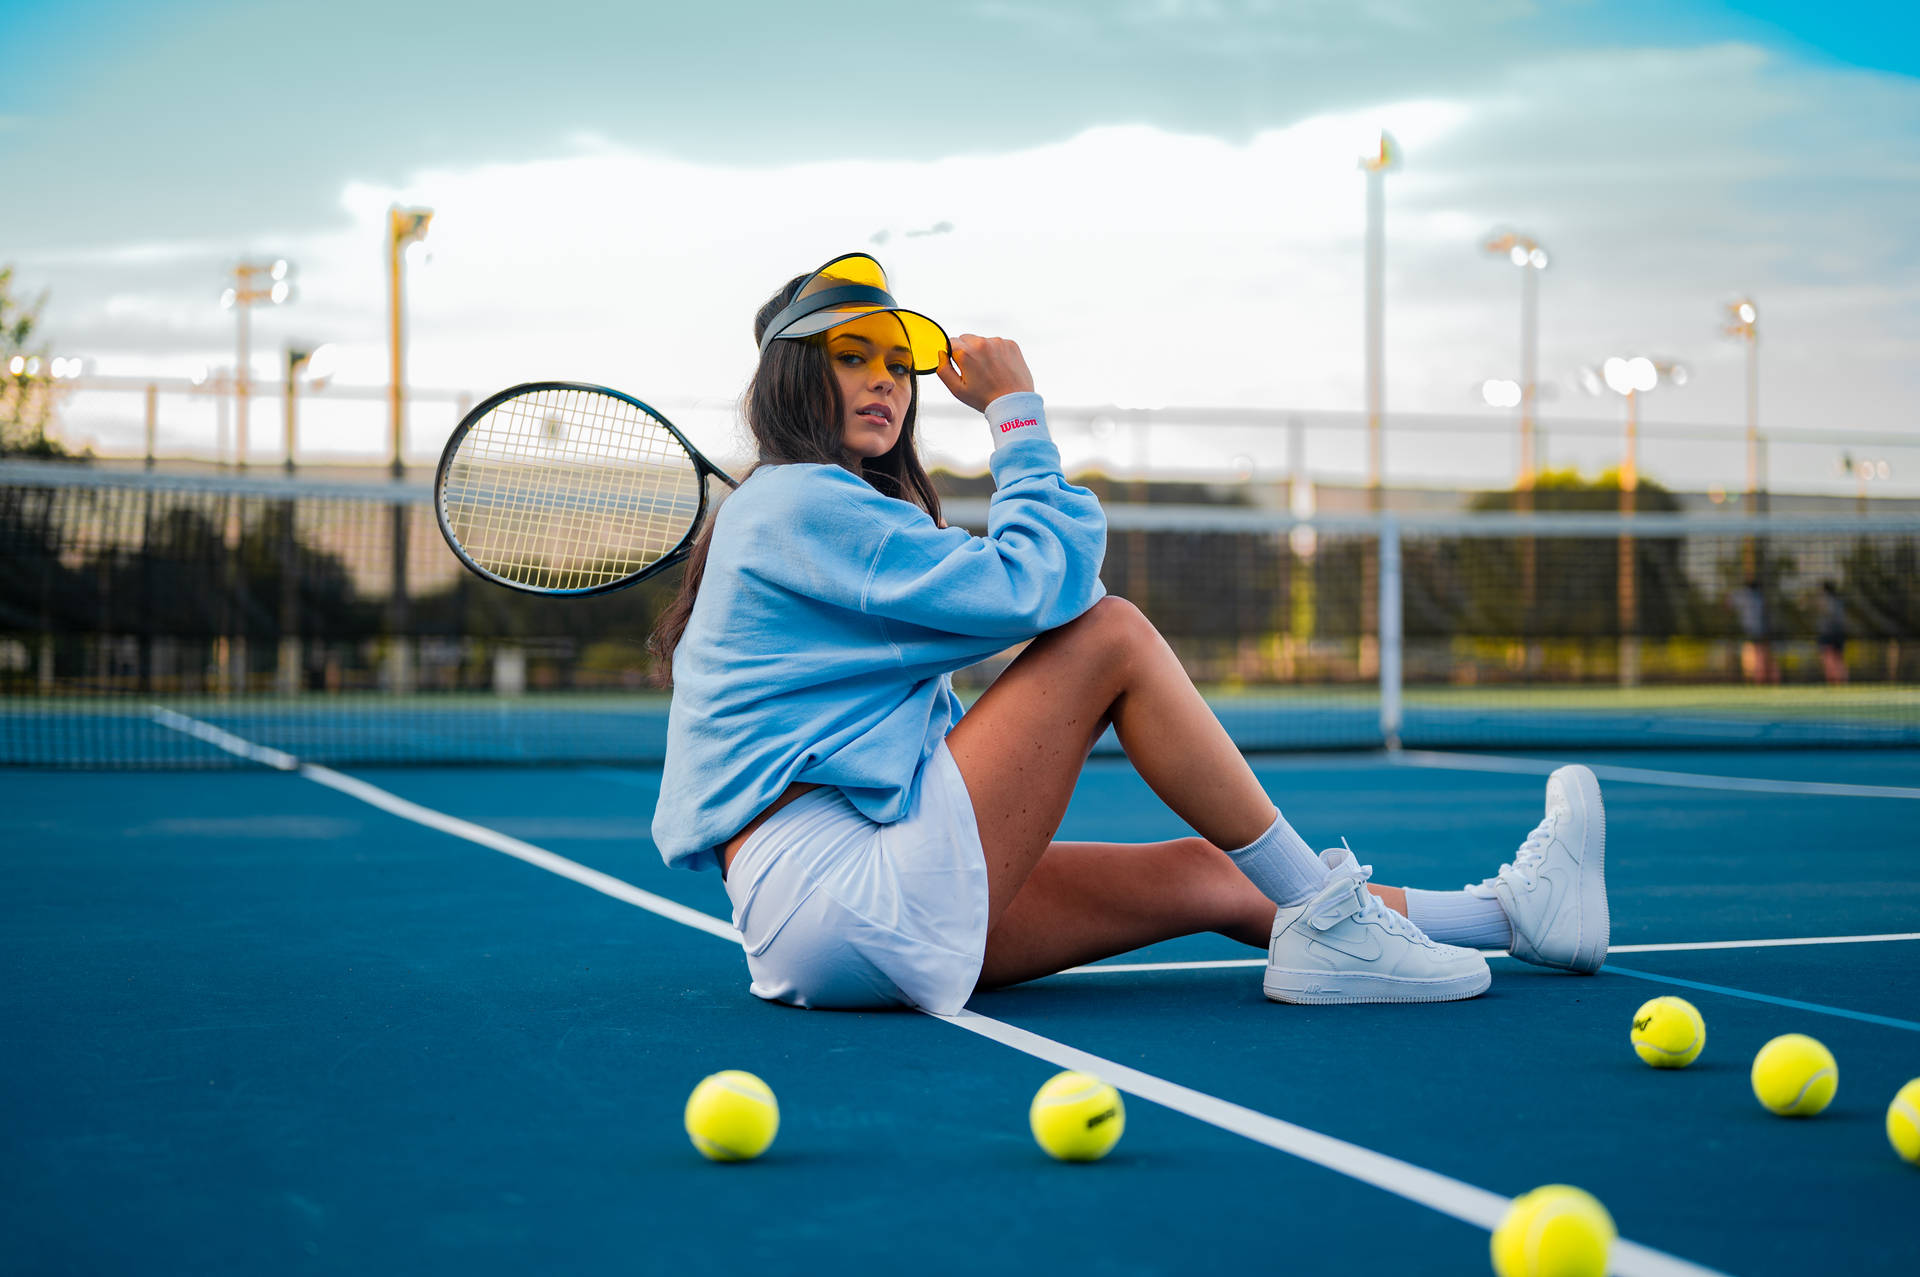 6048X4024 Tennis Wallpaper and Background